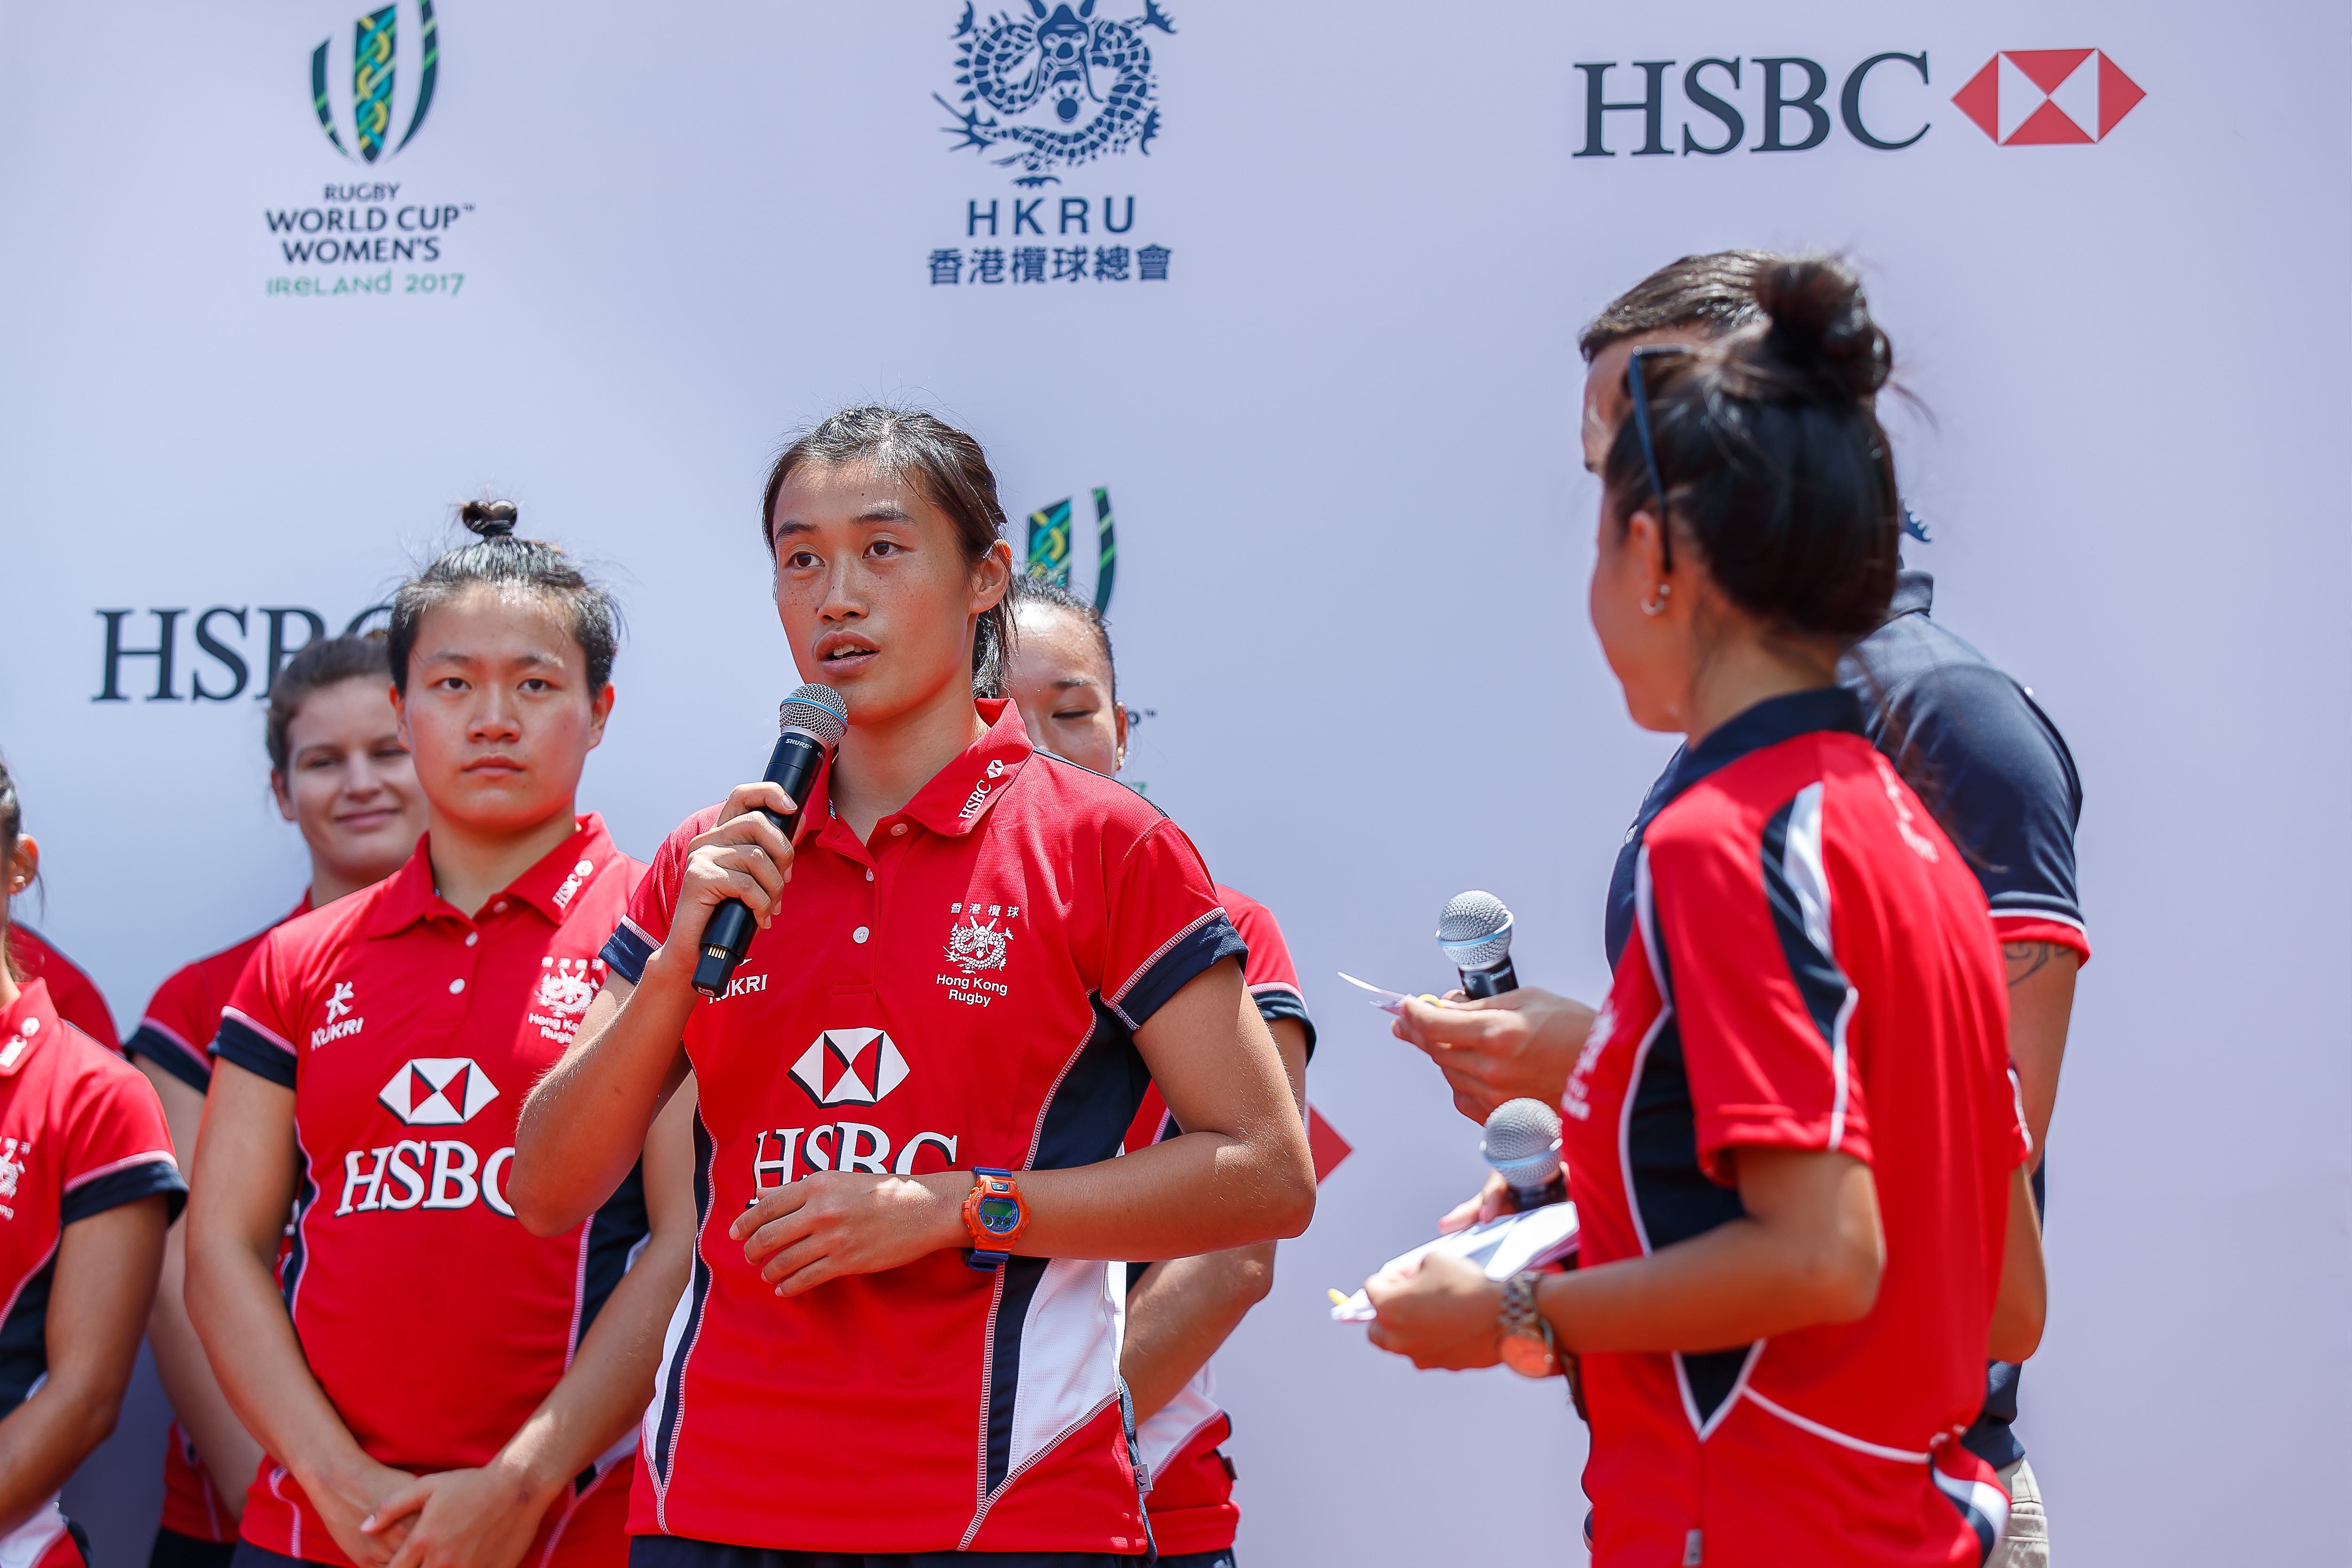 Hong Kong captain Chow Mei-nam speaks ahead of her side’s Women's Rugby World Cup campaign. Photos: HKRU